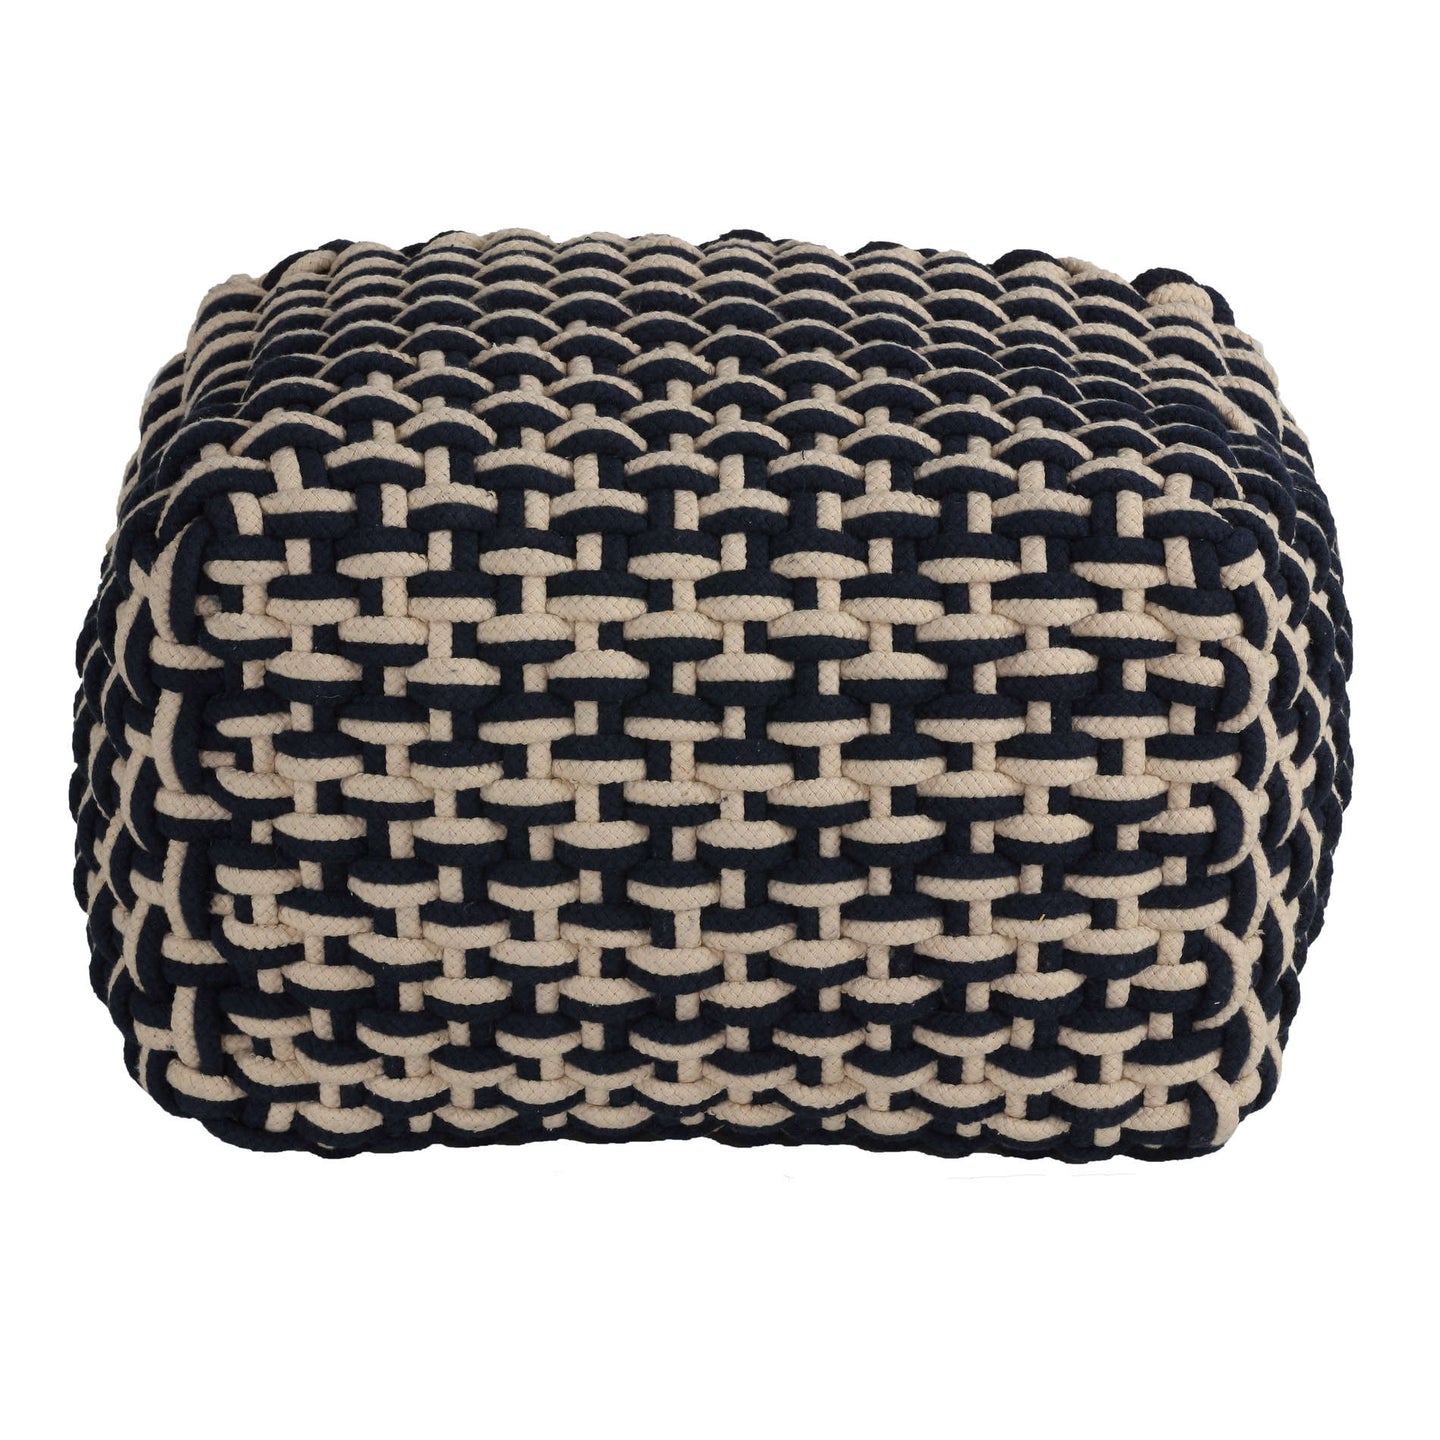 Cortesi Home Griffin Rope Pouf Ottoman, Navy and Cream